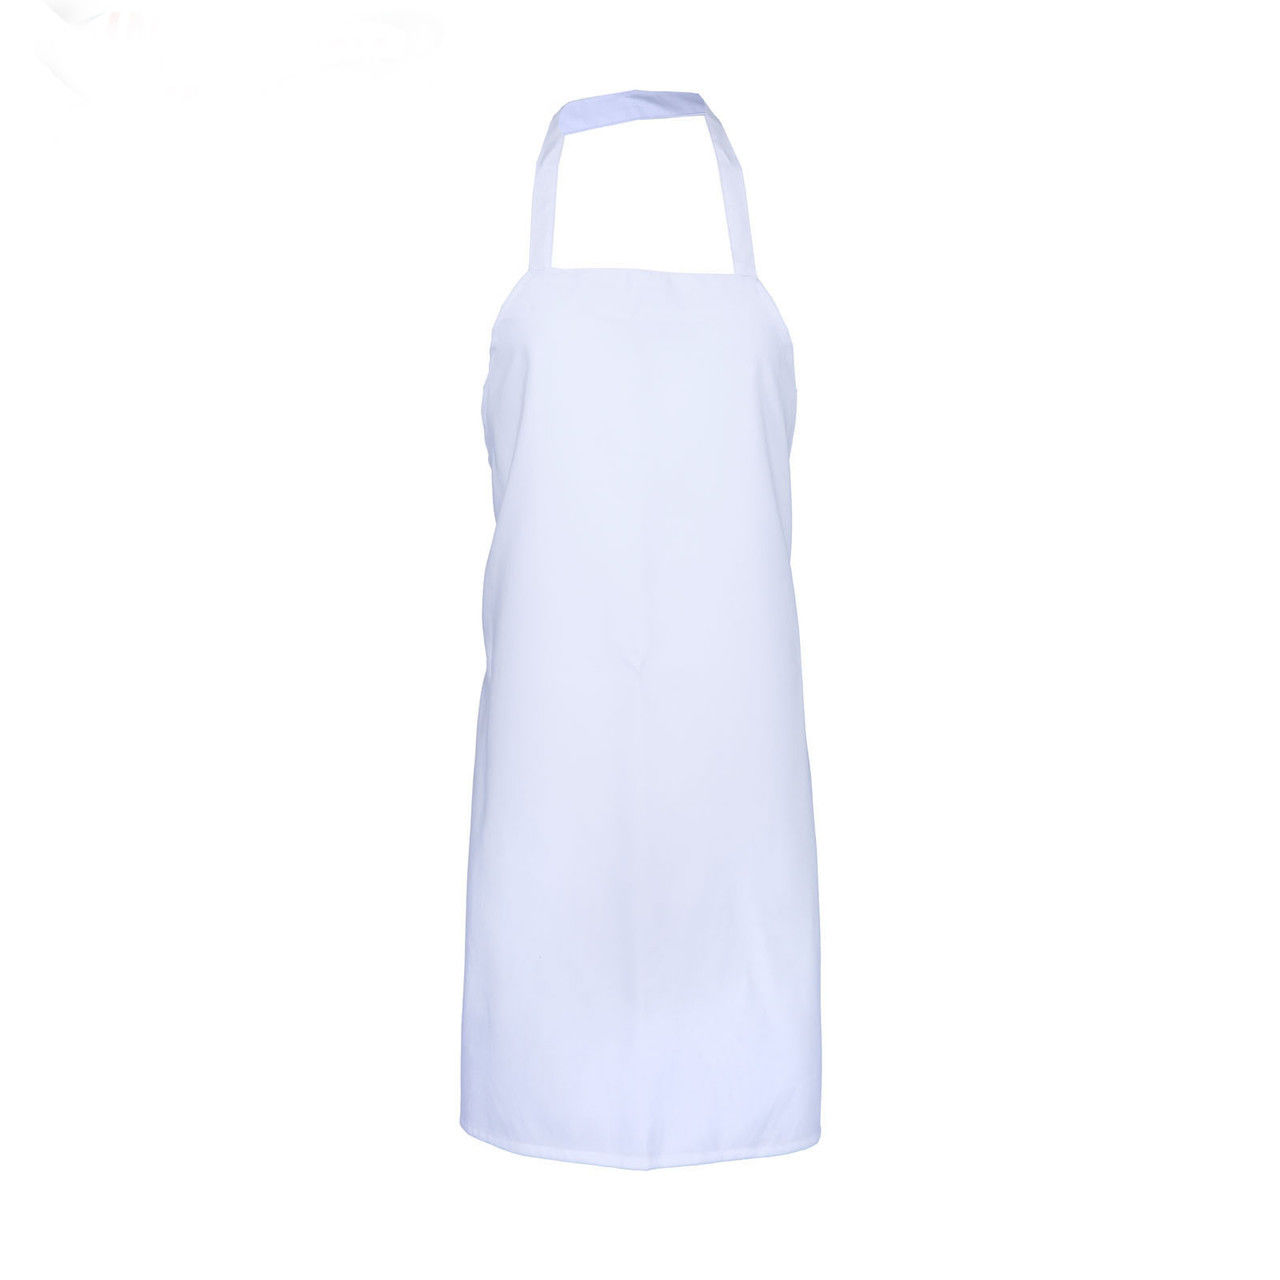 What pinnacle aprons options are available for the Basic Bib Apron?